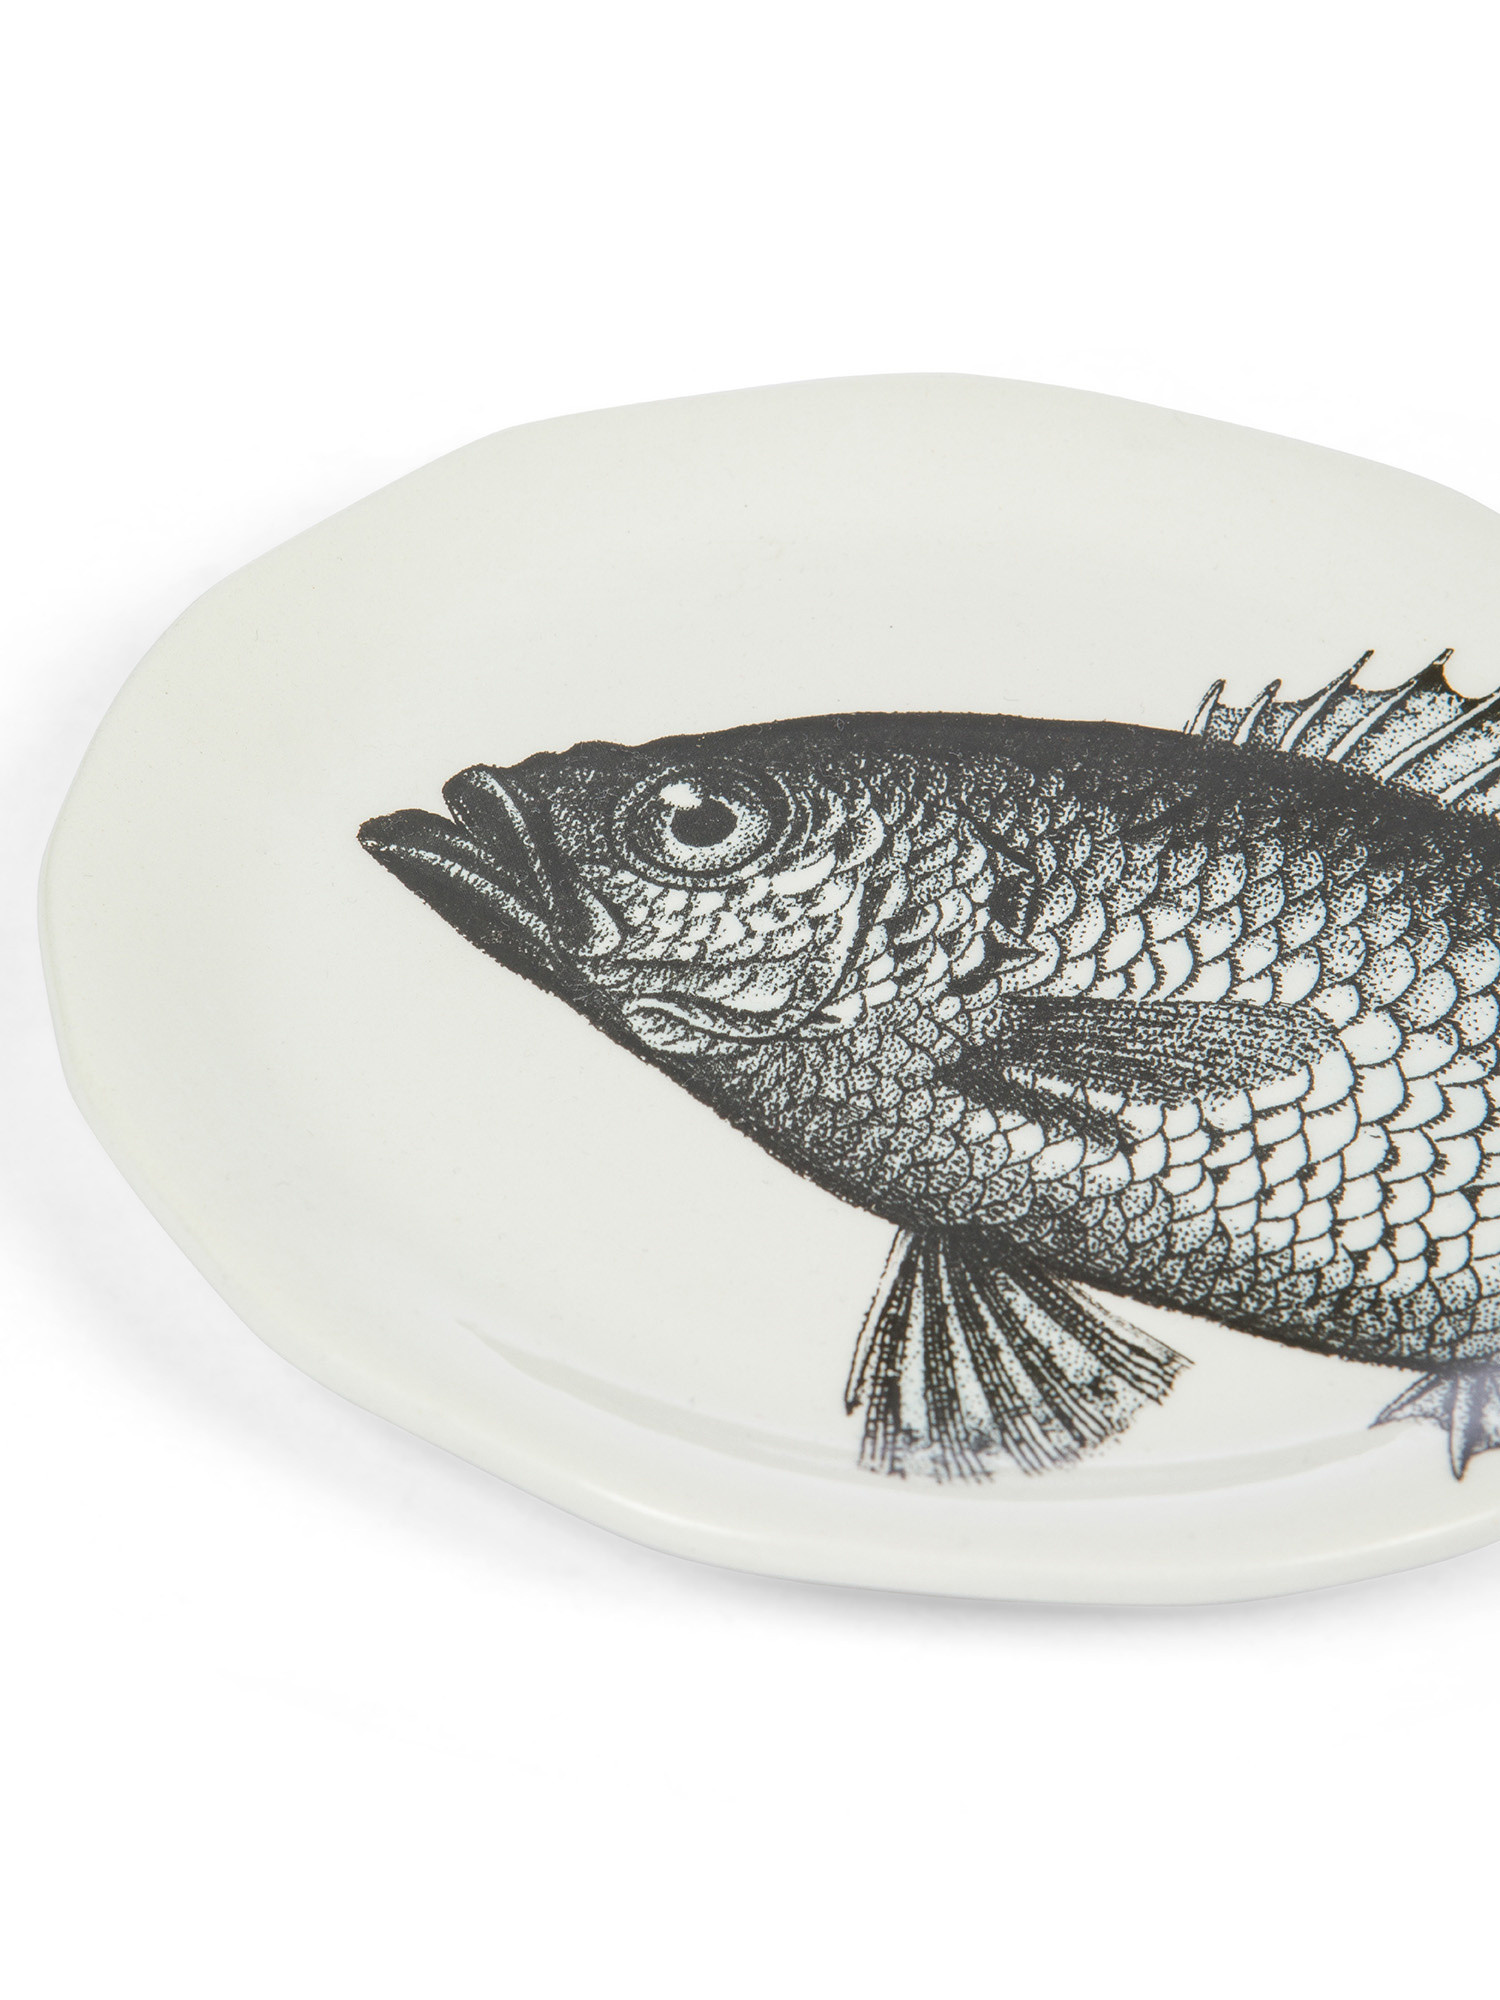 Bread plate with fish design, White Black, large image number 1